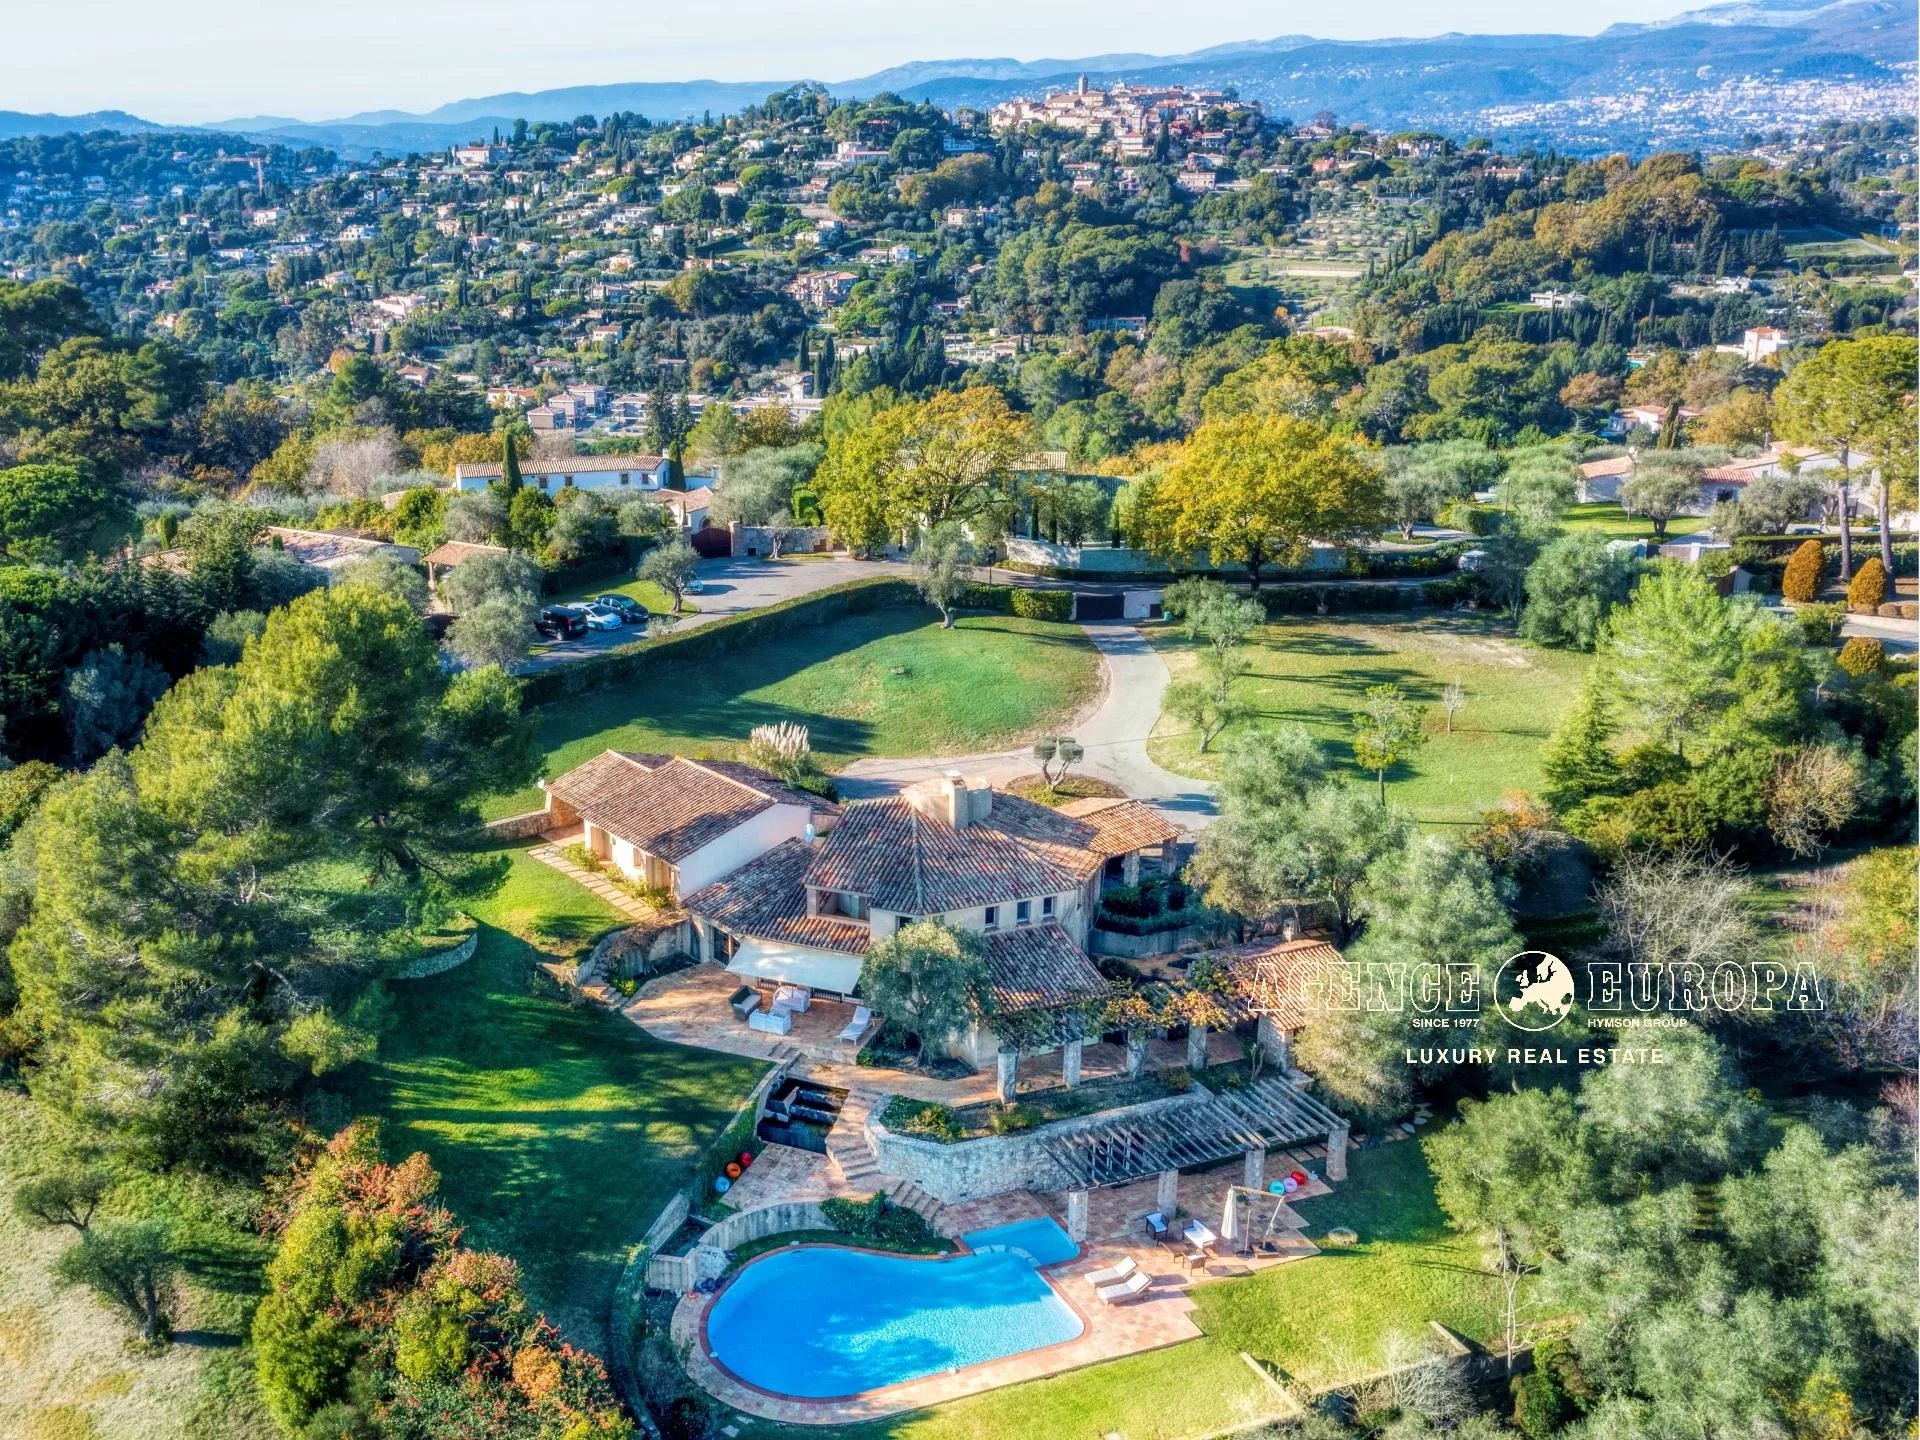 MOUGINS RESIDENTIAL AREA - GUARDED DOMAIN